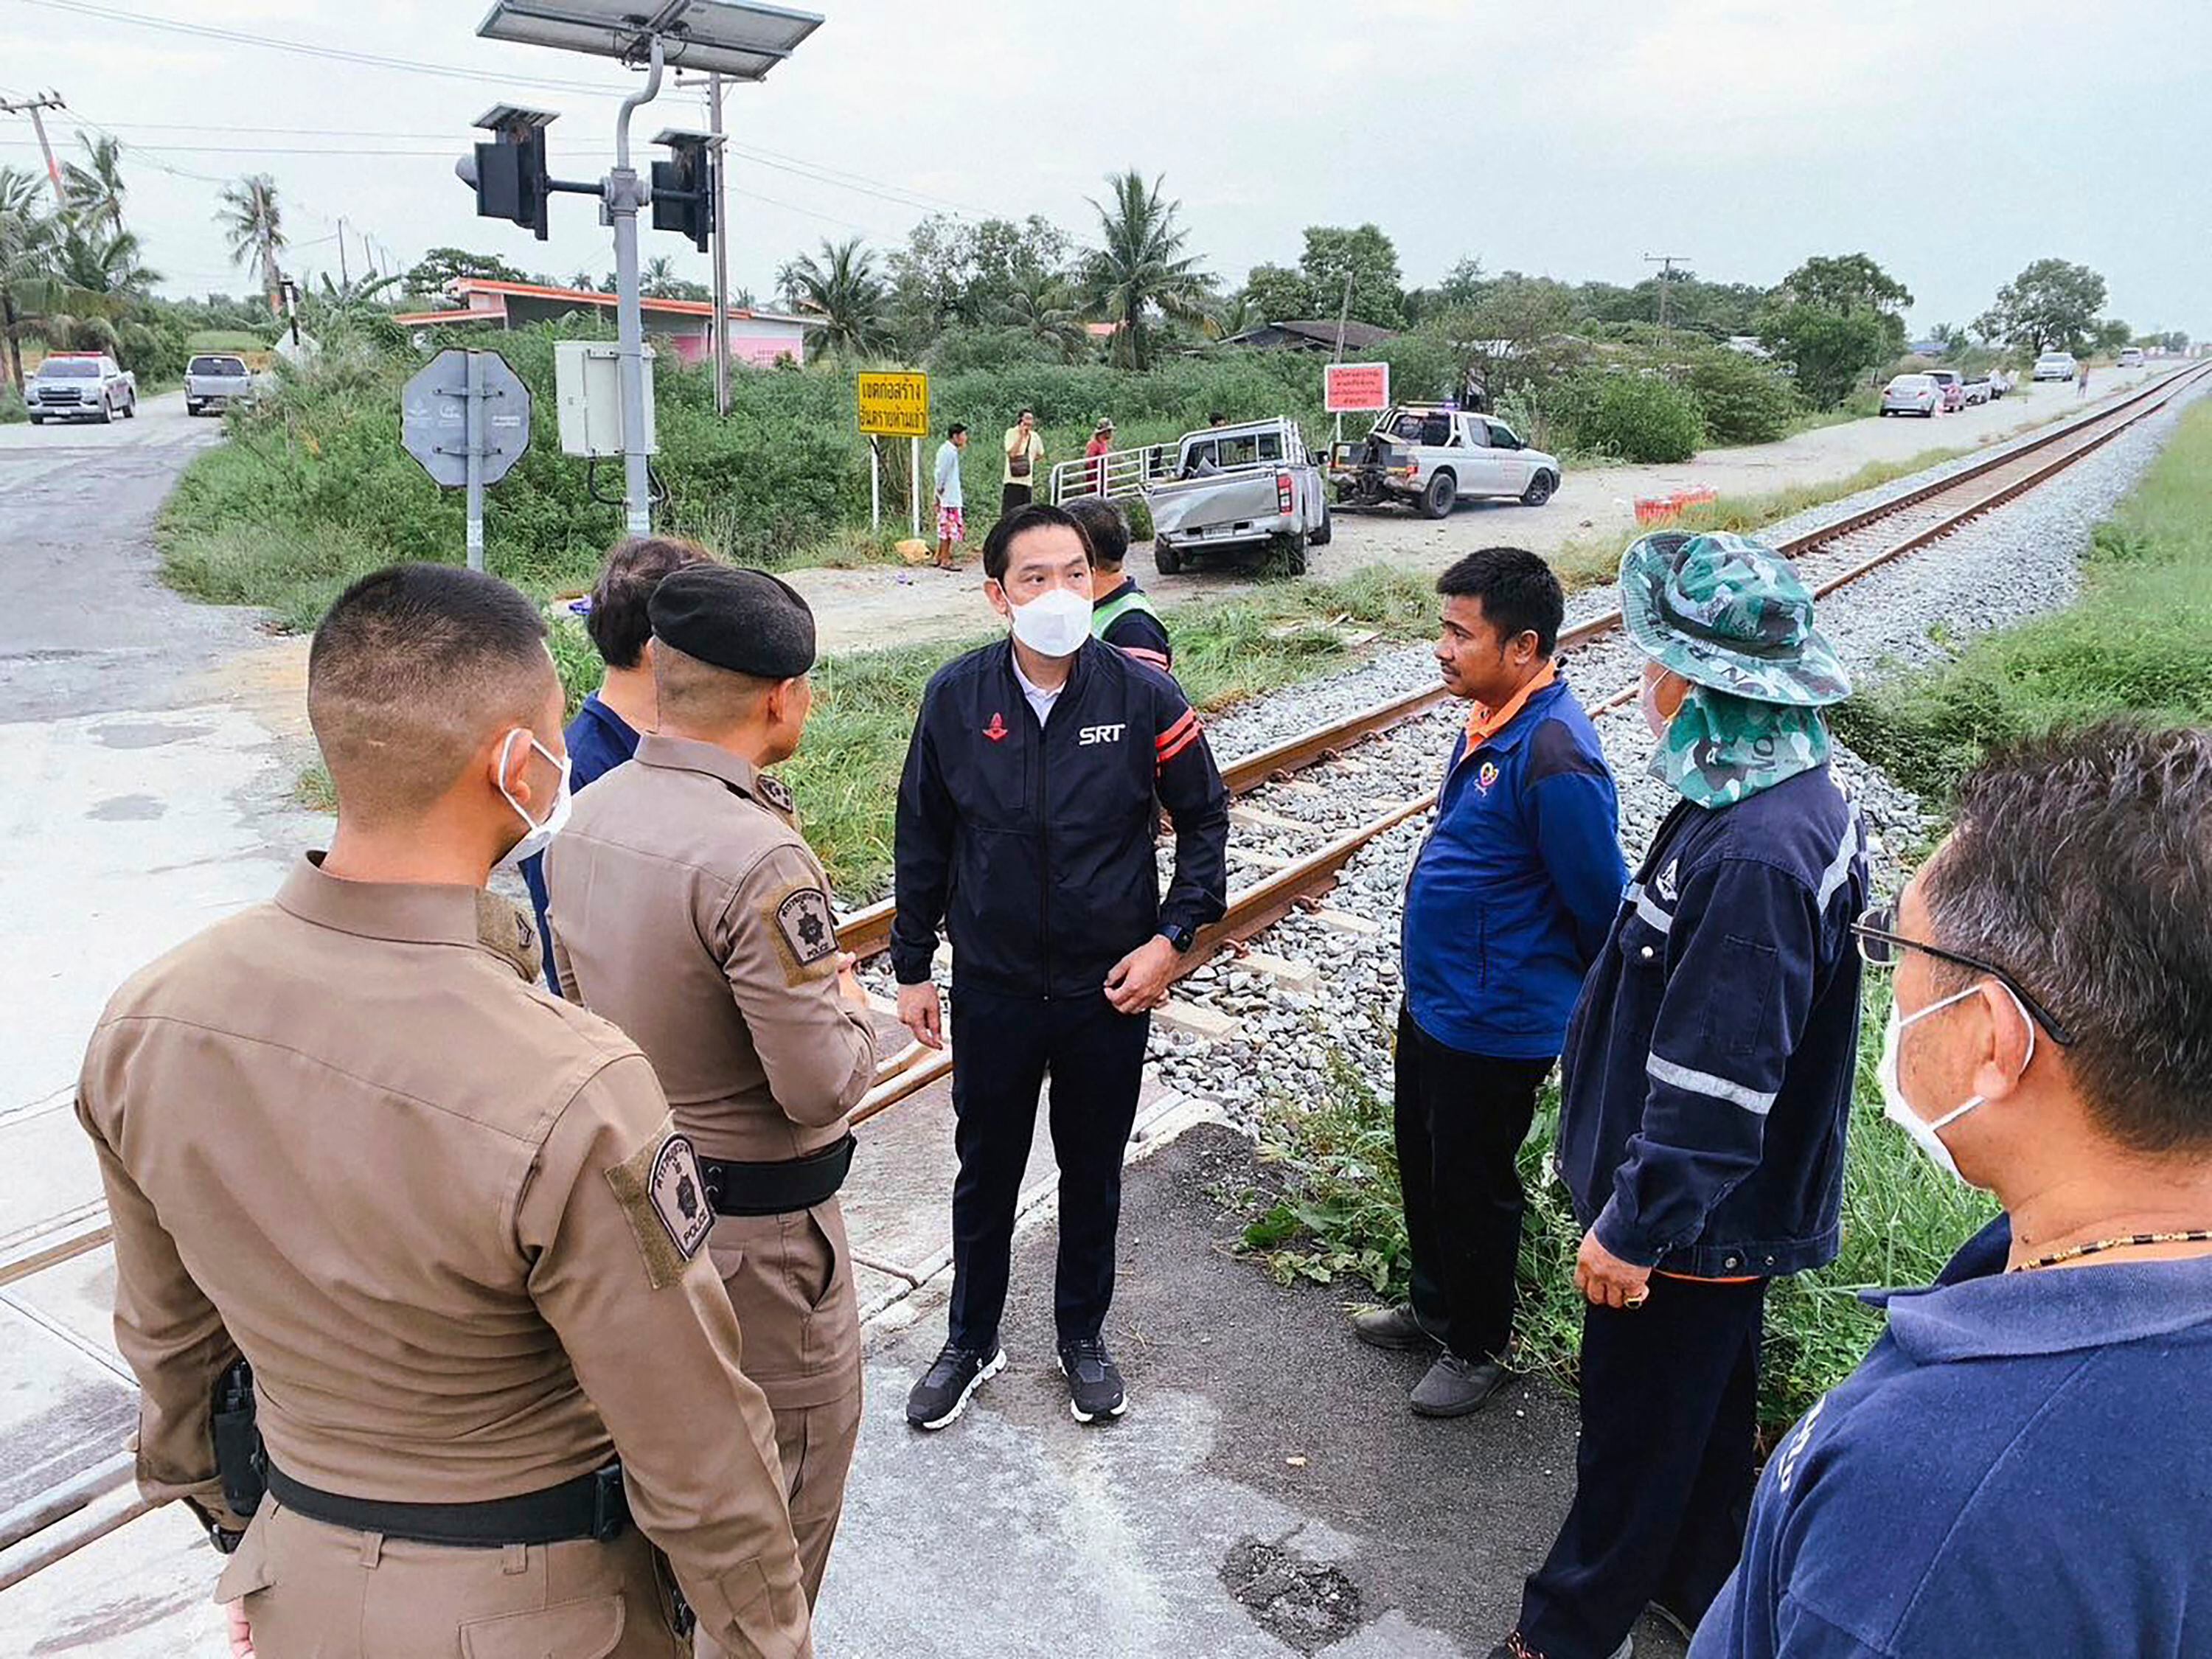 Thailand train collision with pickup truck kills 8 people and injures 4, railway agency says